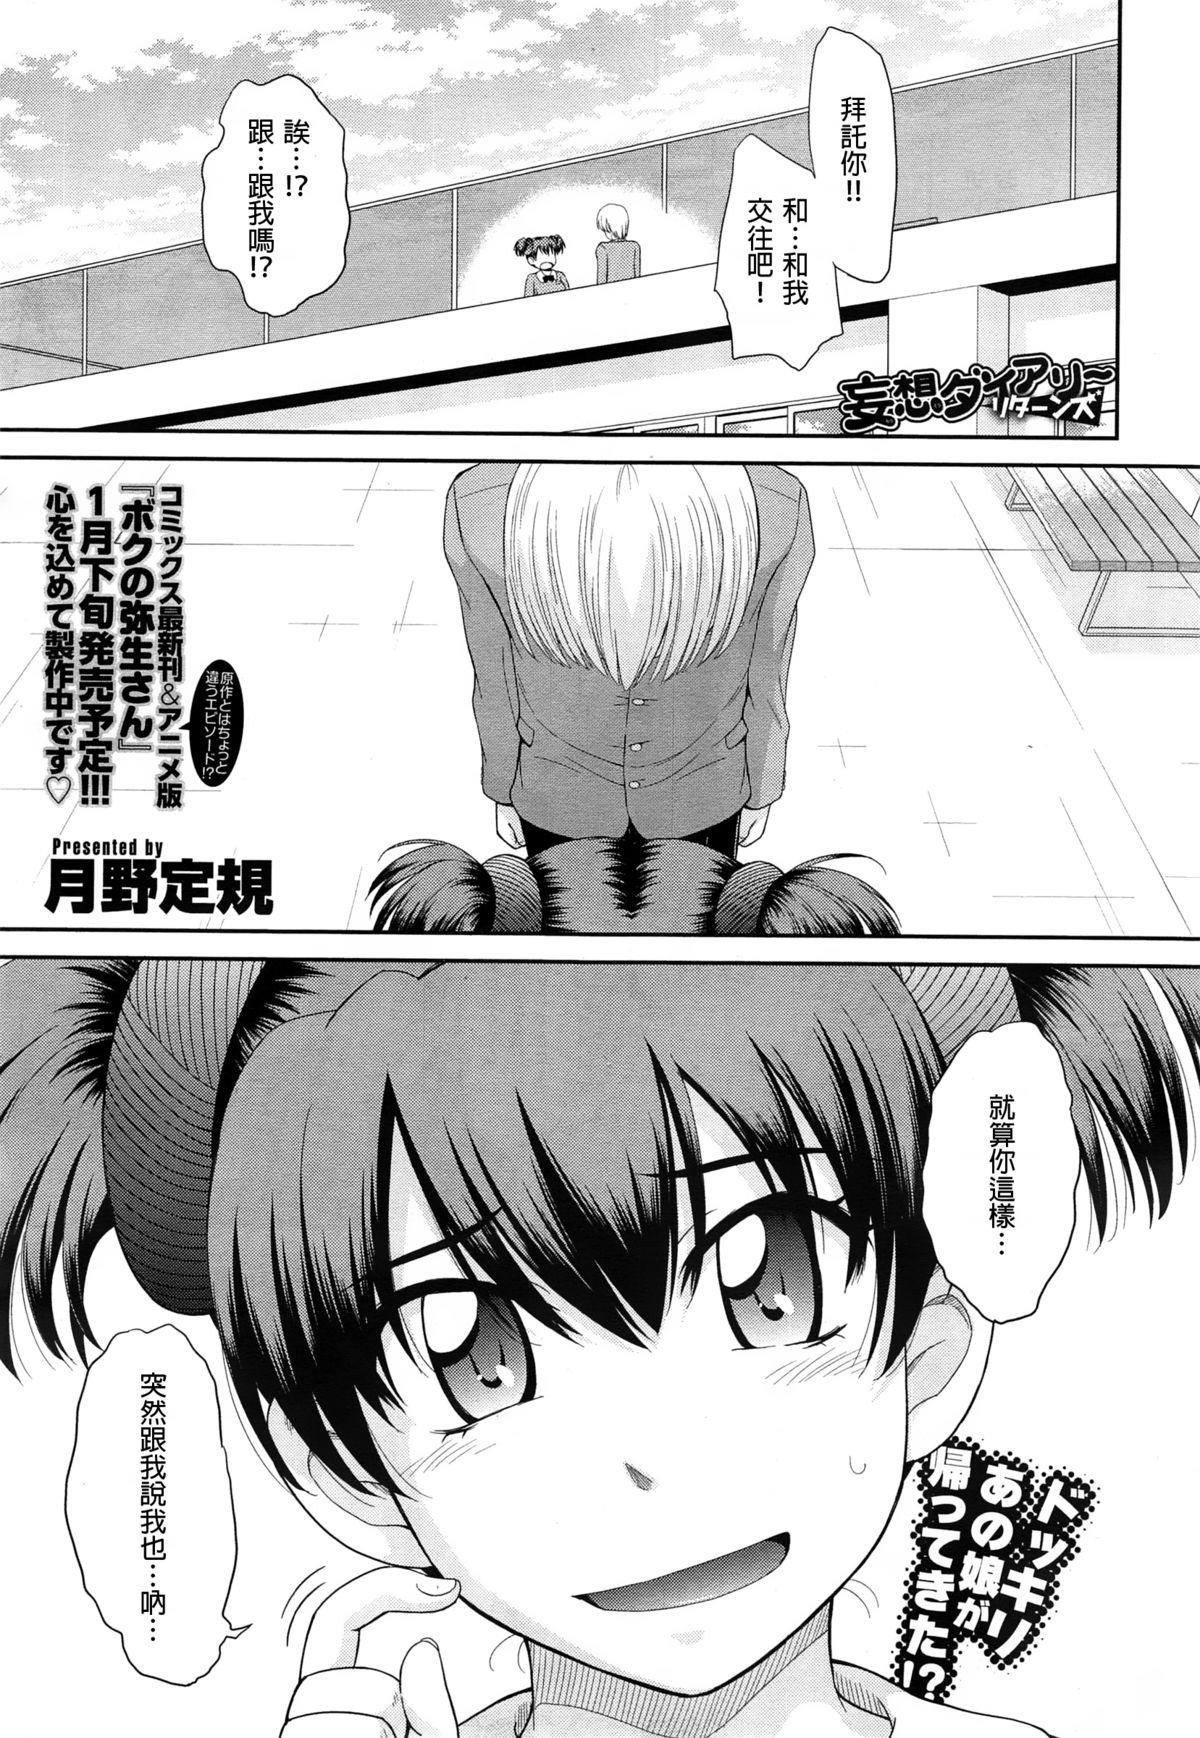 Close Up Mousou Diary Returns Humiliation Pov - Page 1